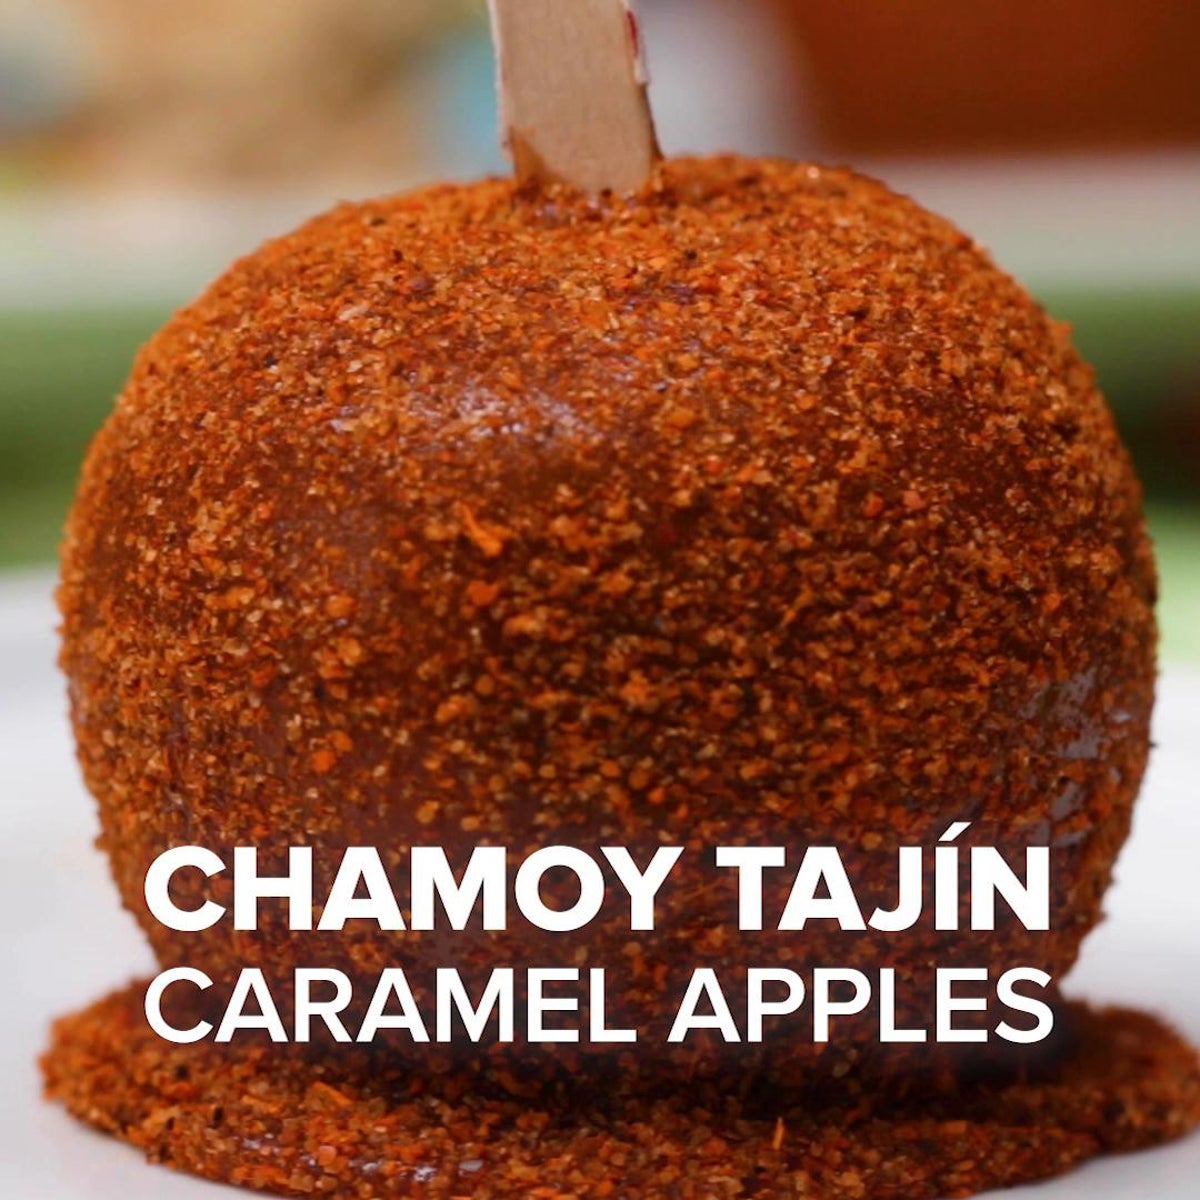 What Is Chamoy And How Is It Best Used?